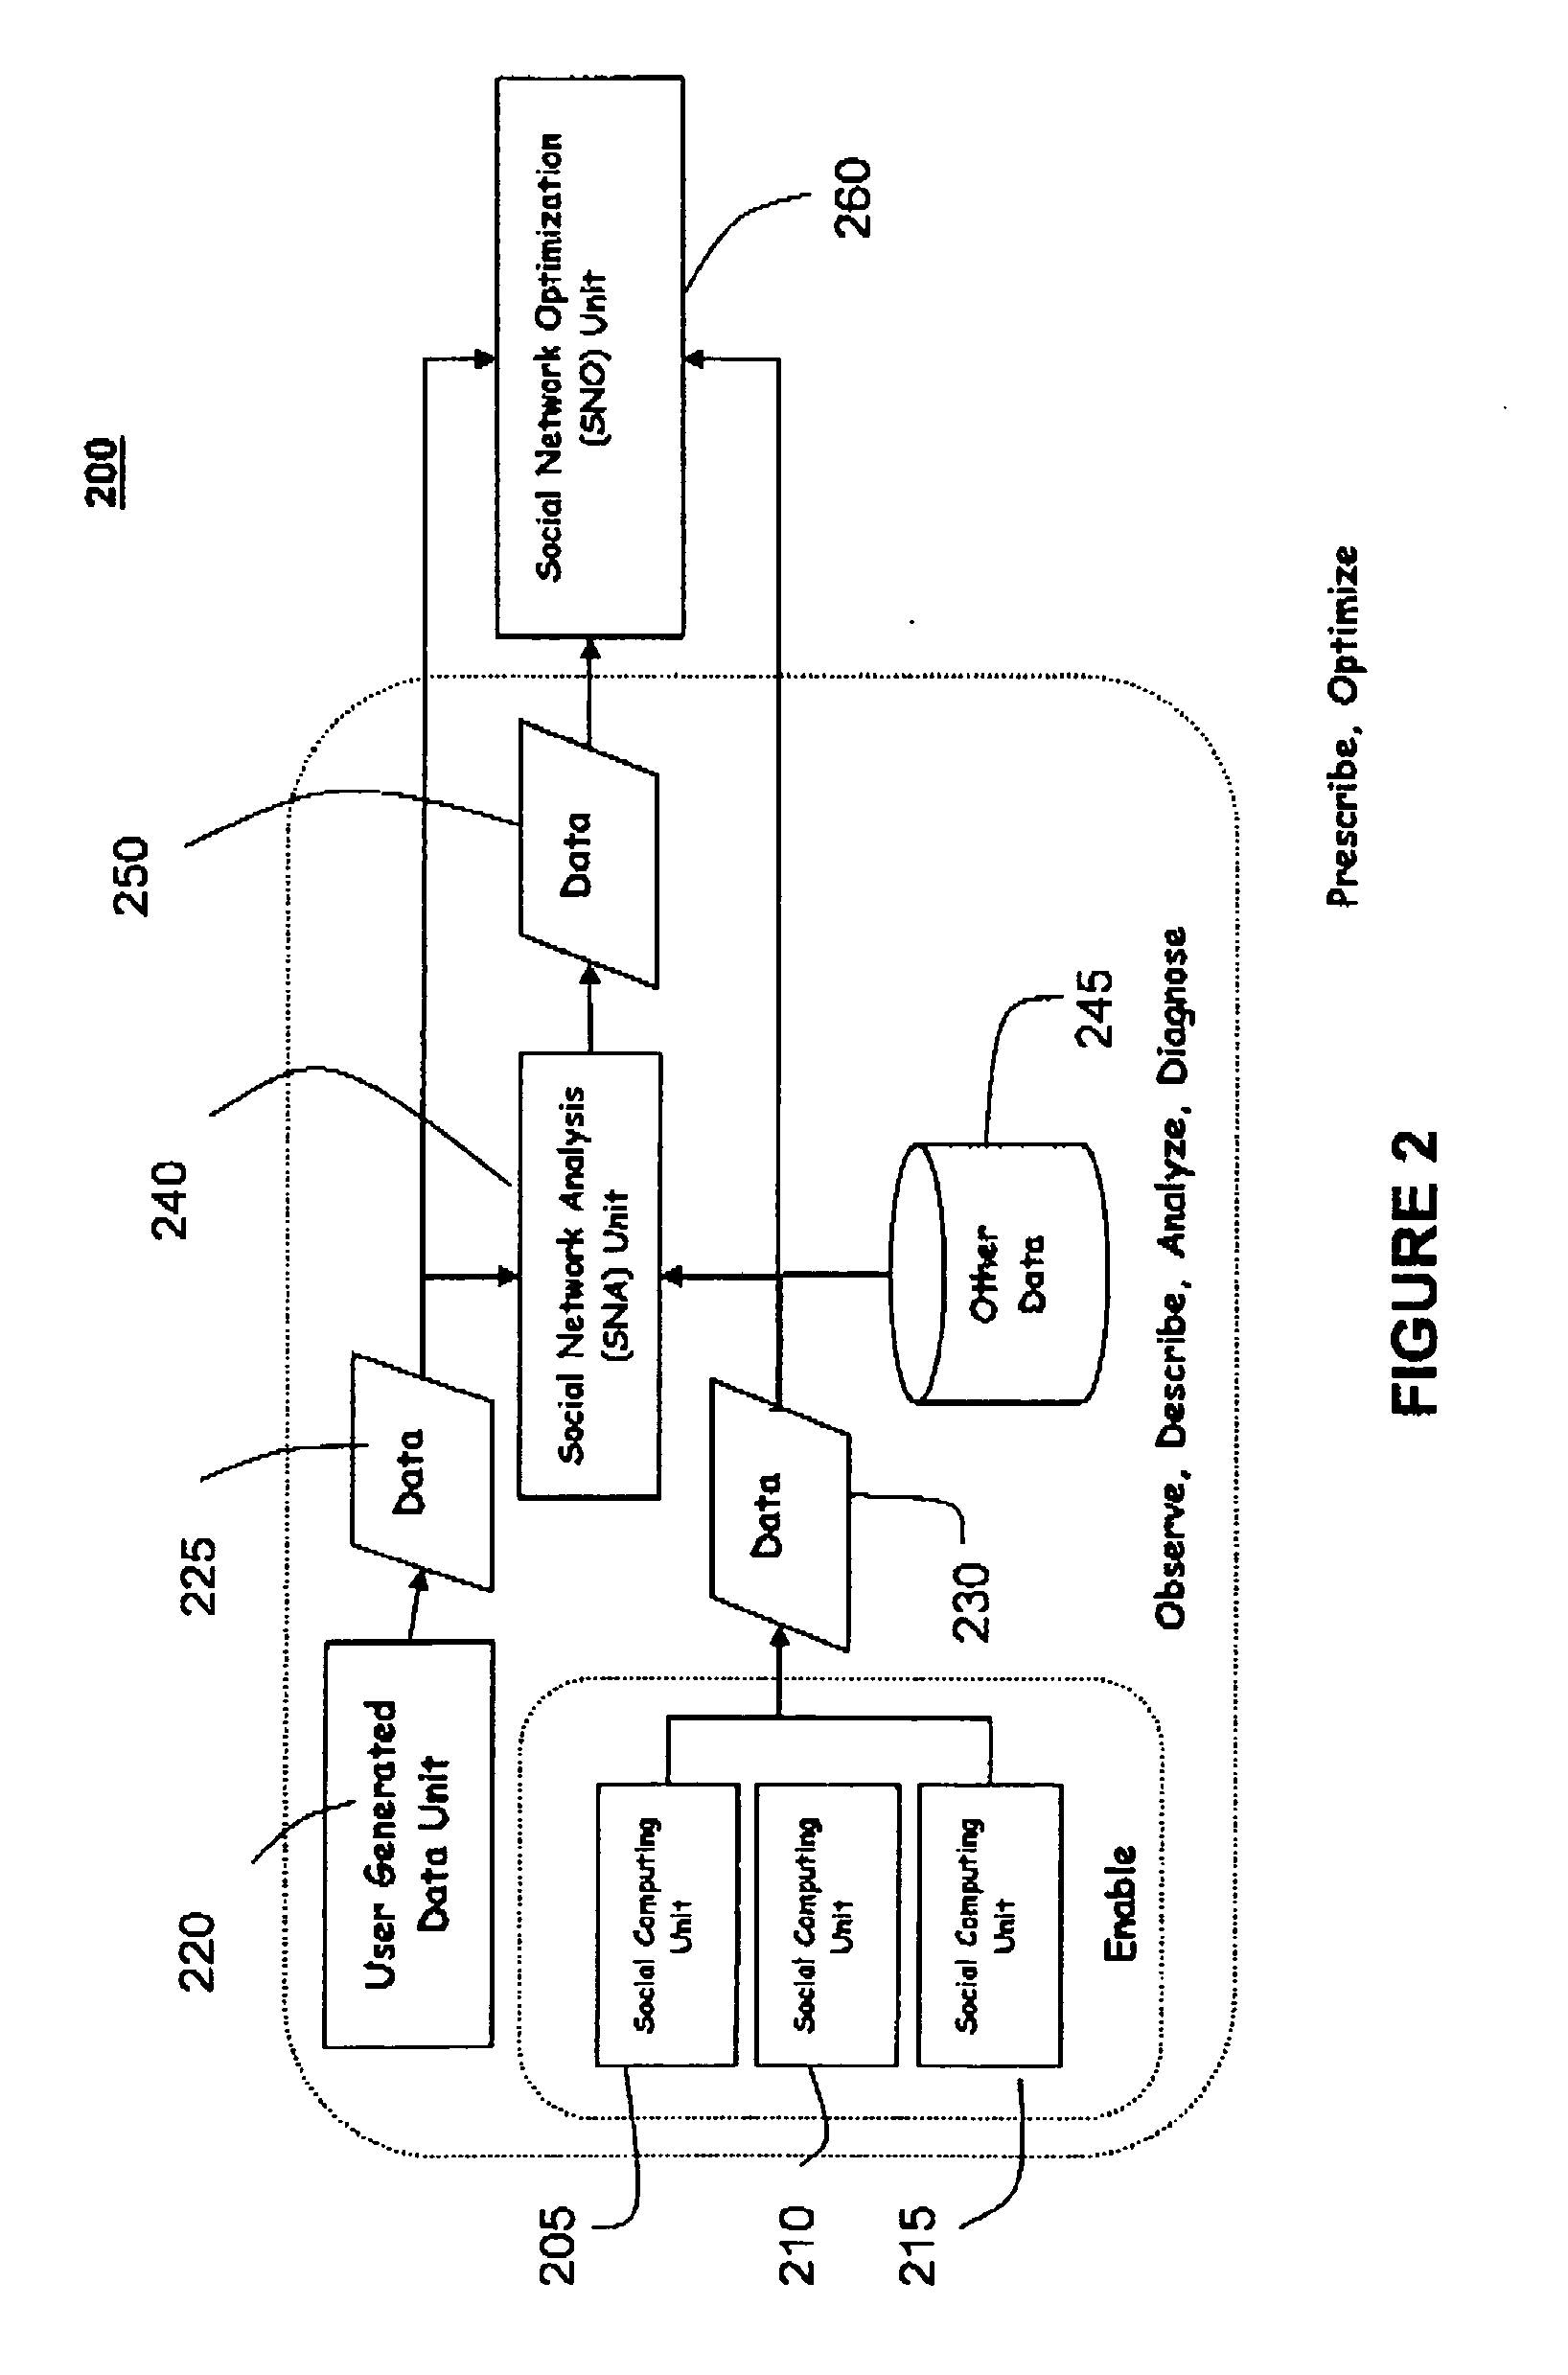 System and method for constructing a social network from multiple disparate, heterogeneous data sources